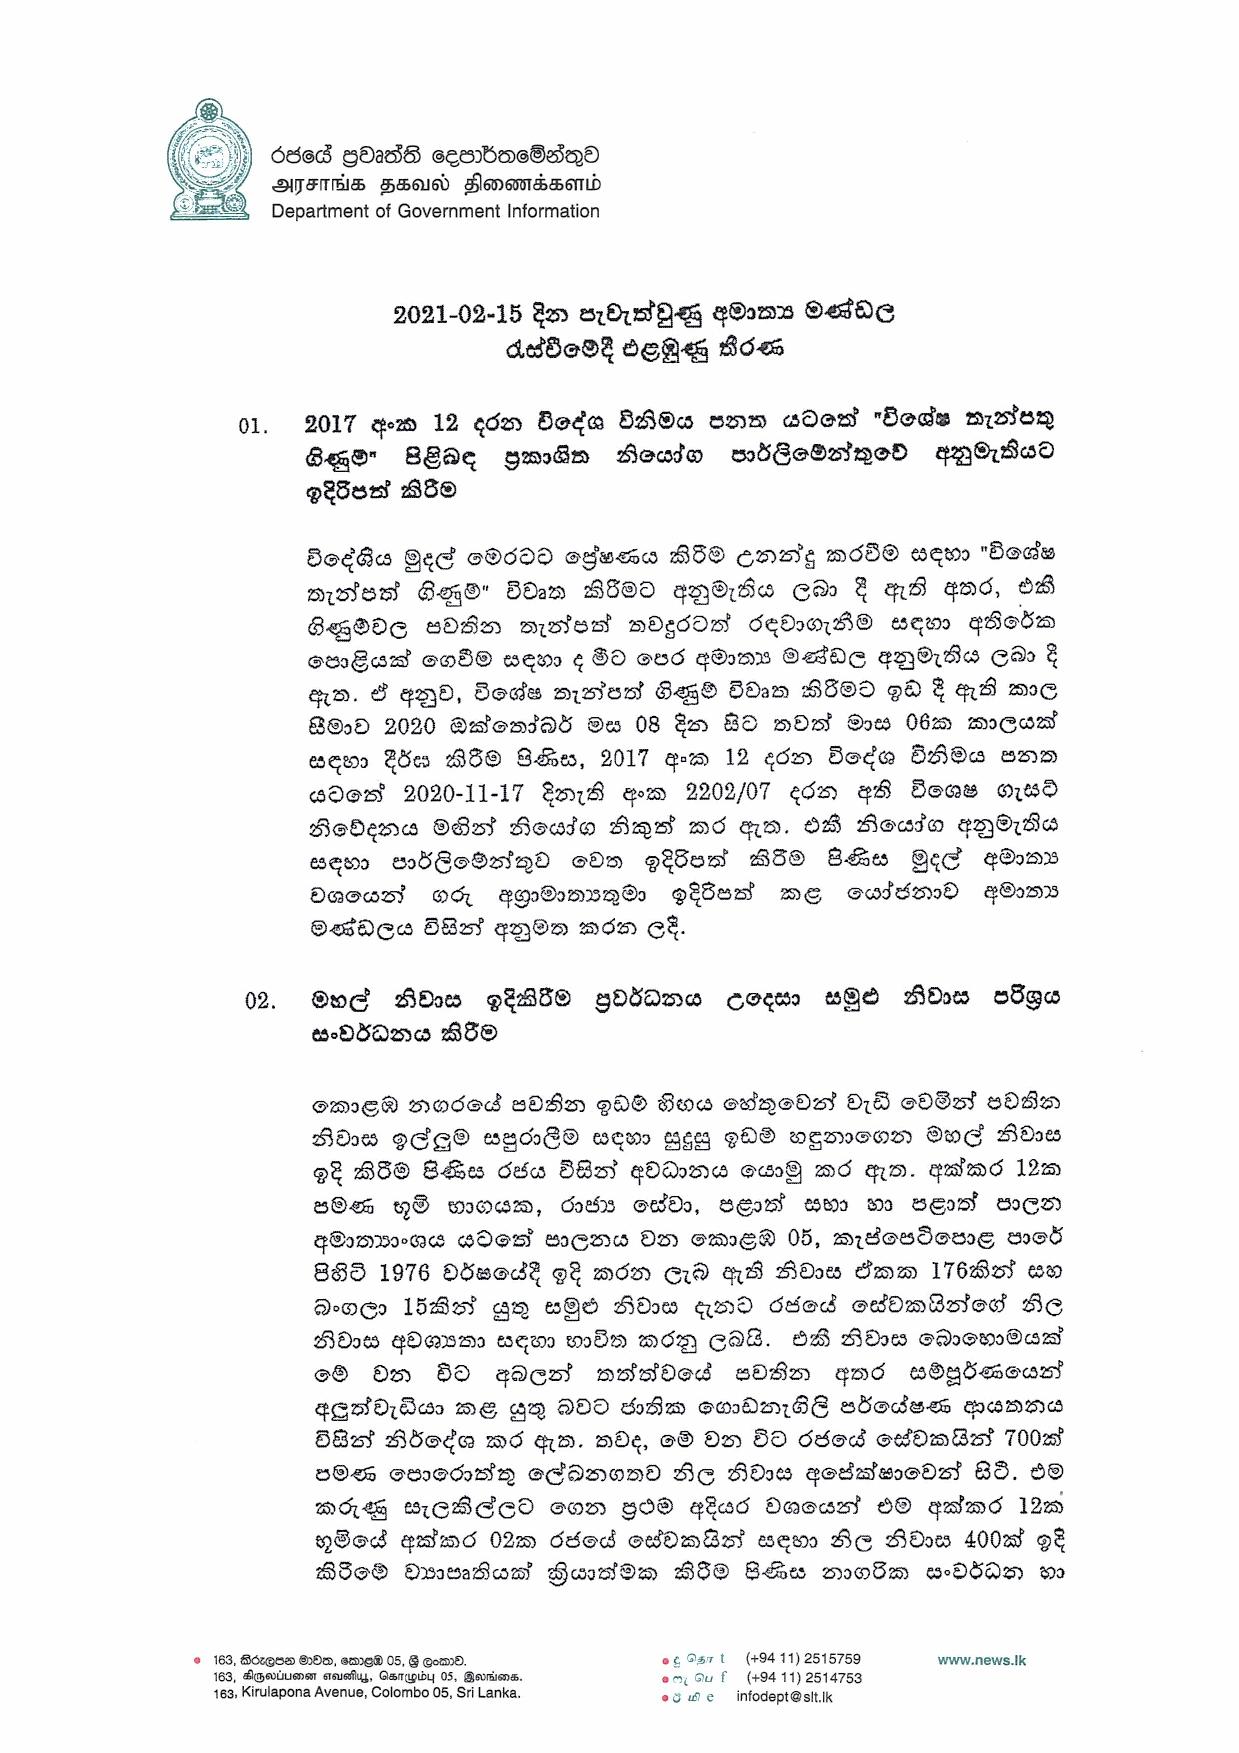 Cabinet Decision on 15.02.2021 page 001